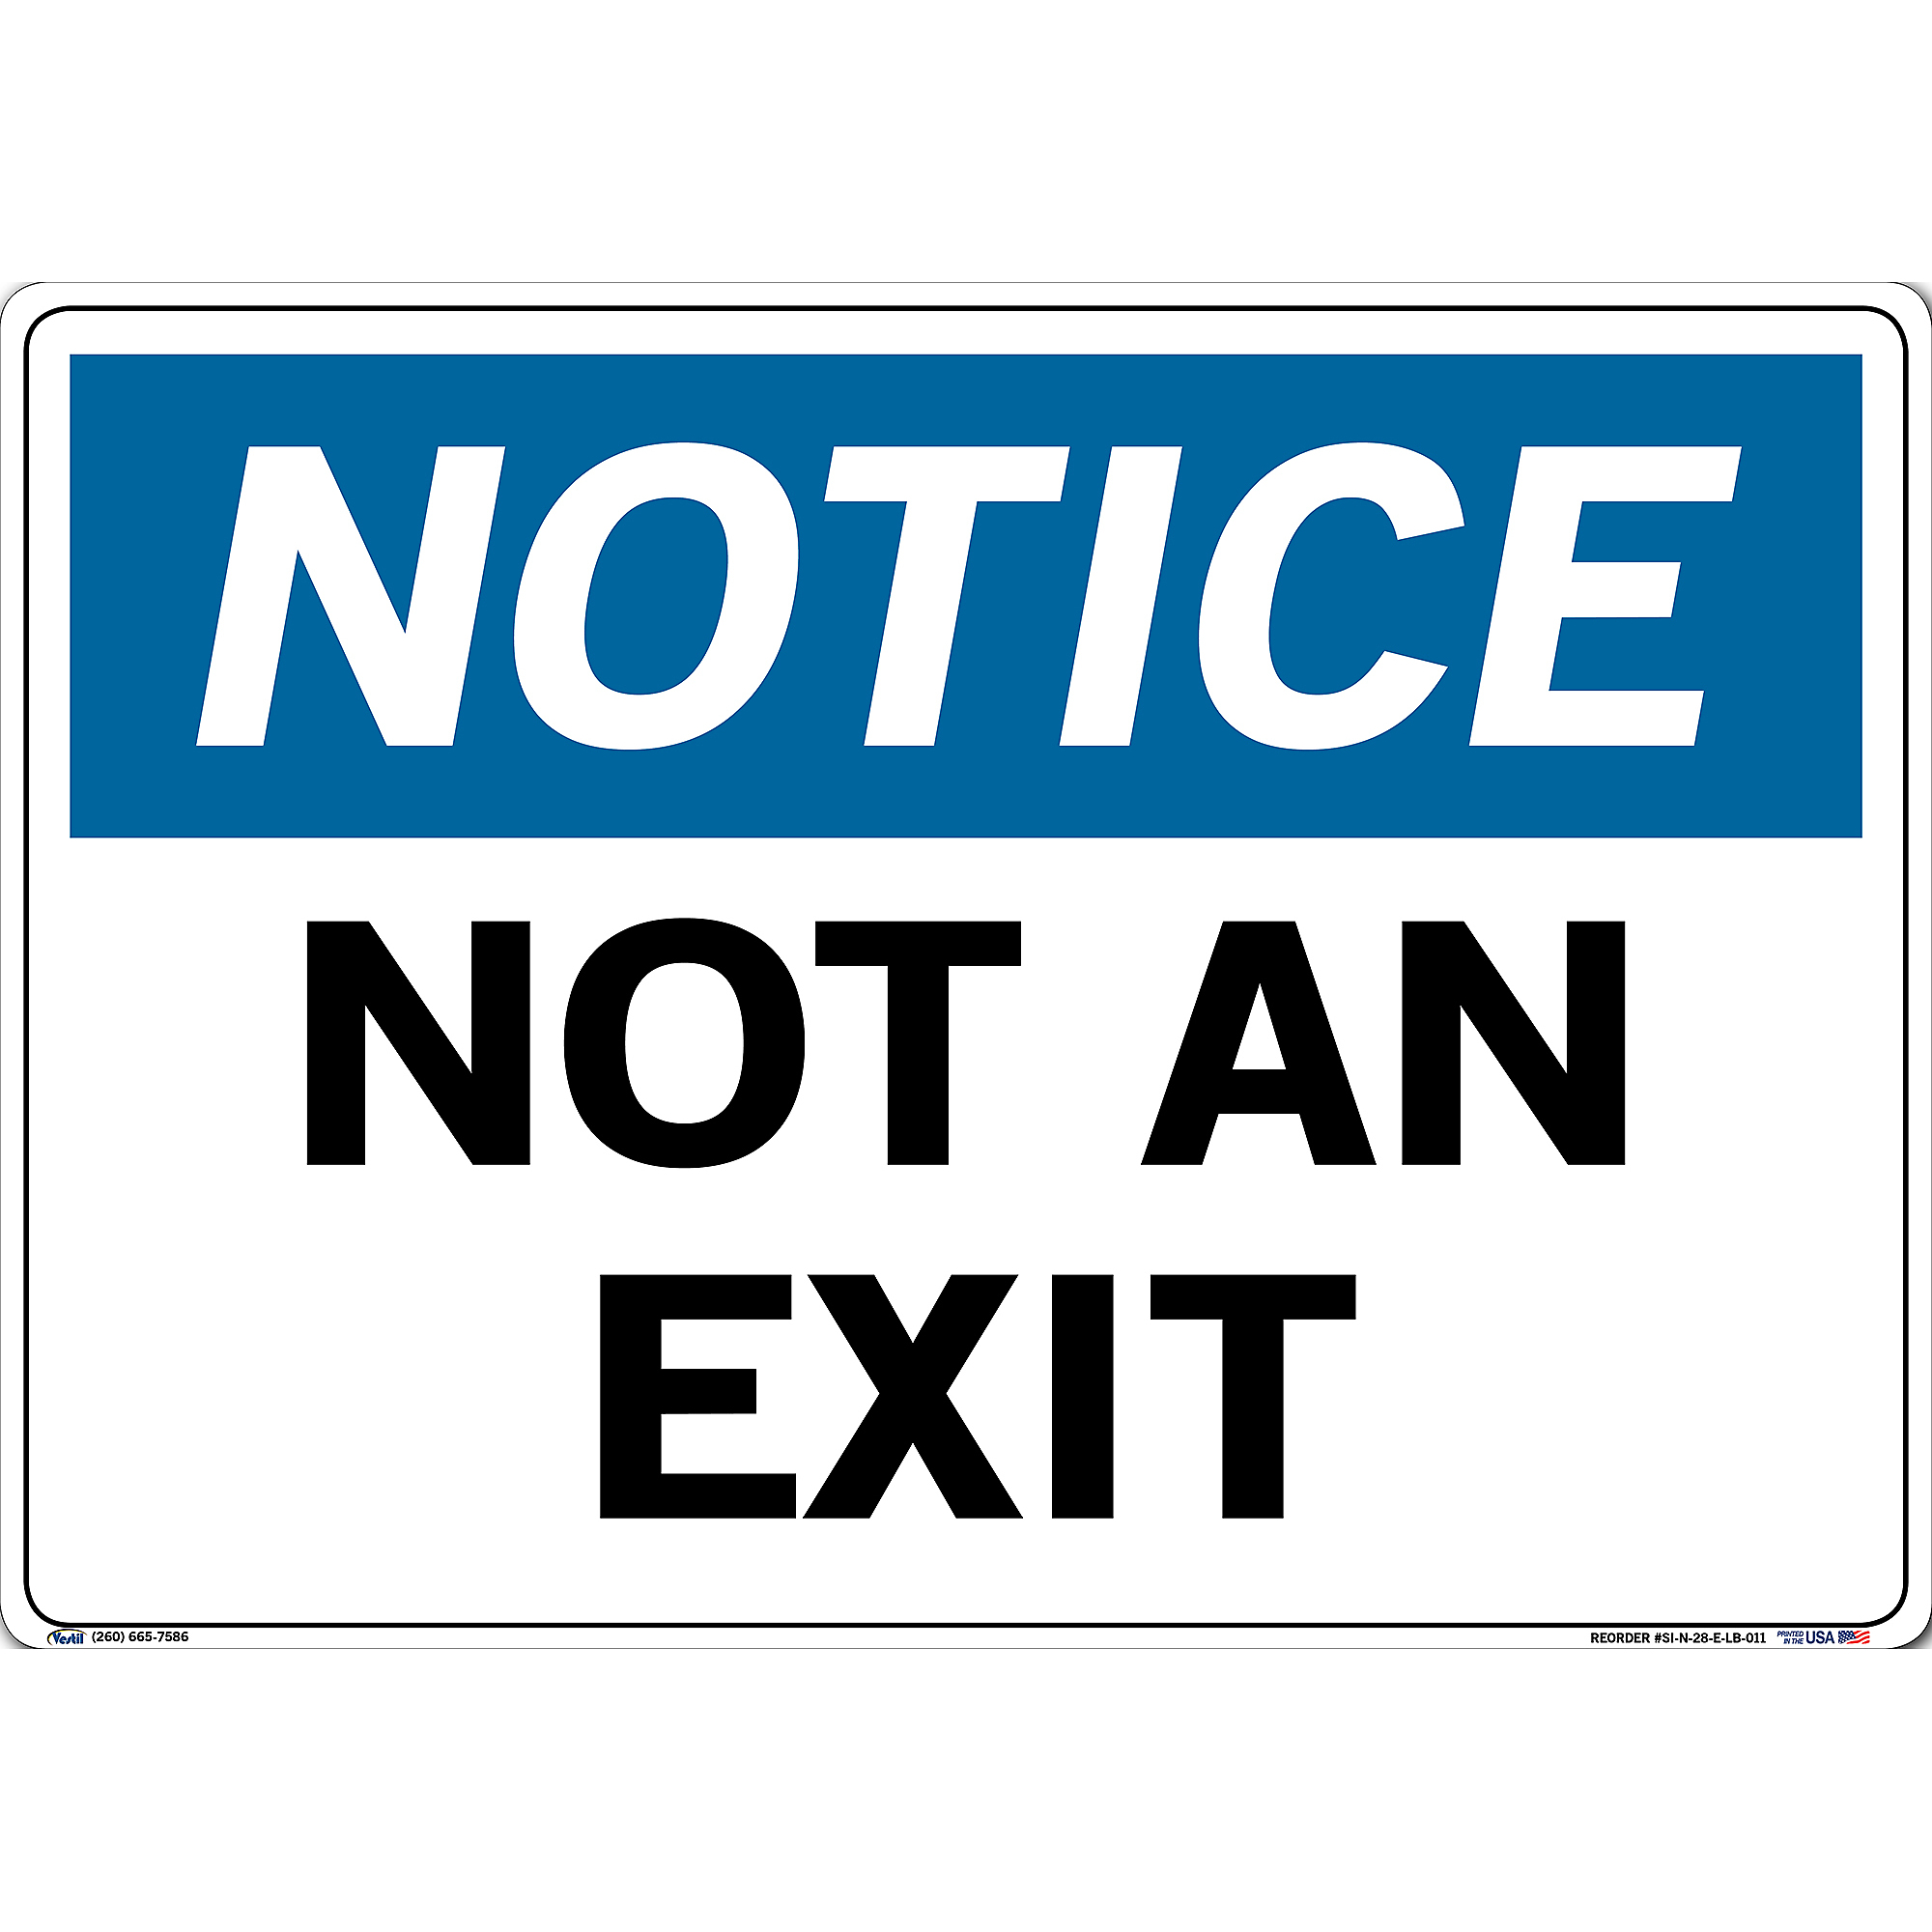 Vestil, Notice Sign Decal, Sign Message NOT AN EXIT, Height 14.5 in, Width 20.5 in, Model SI-N-28-E-LB-011